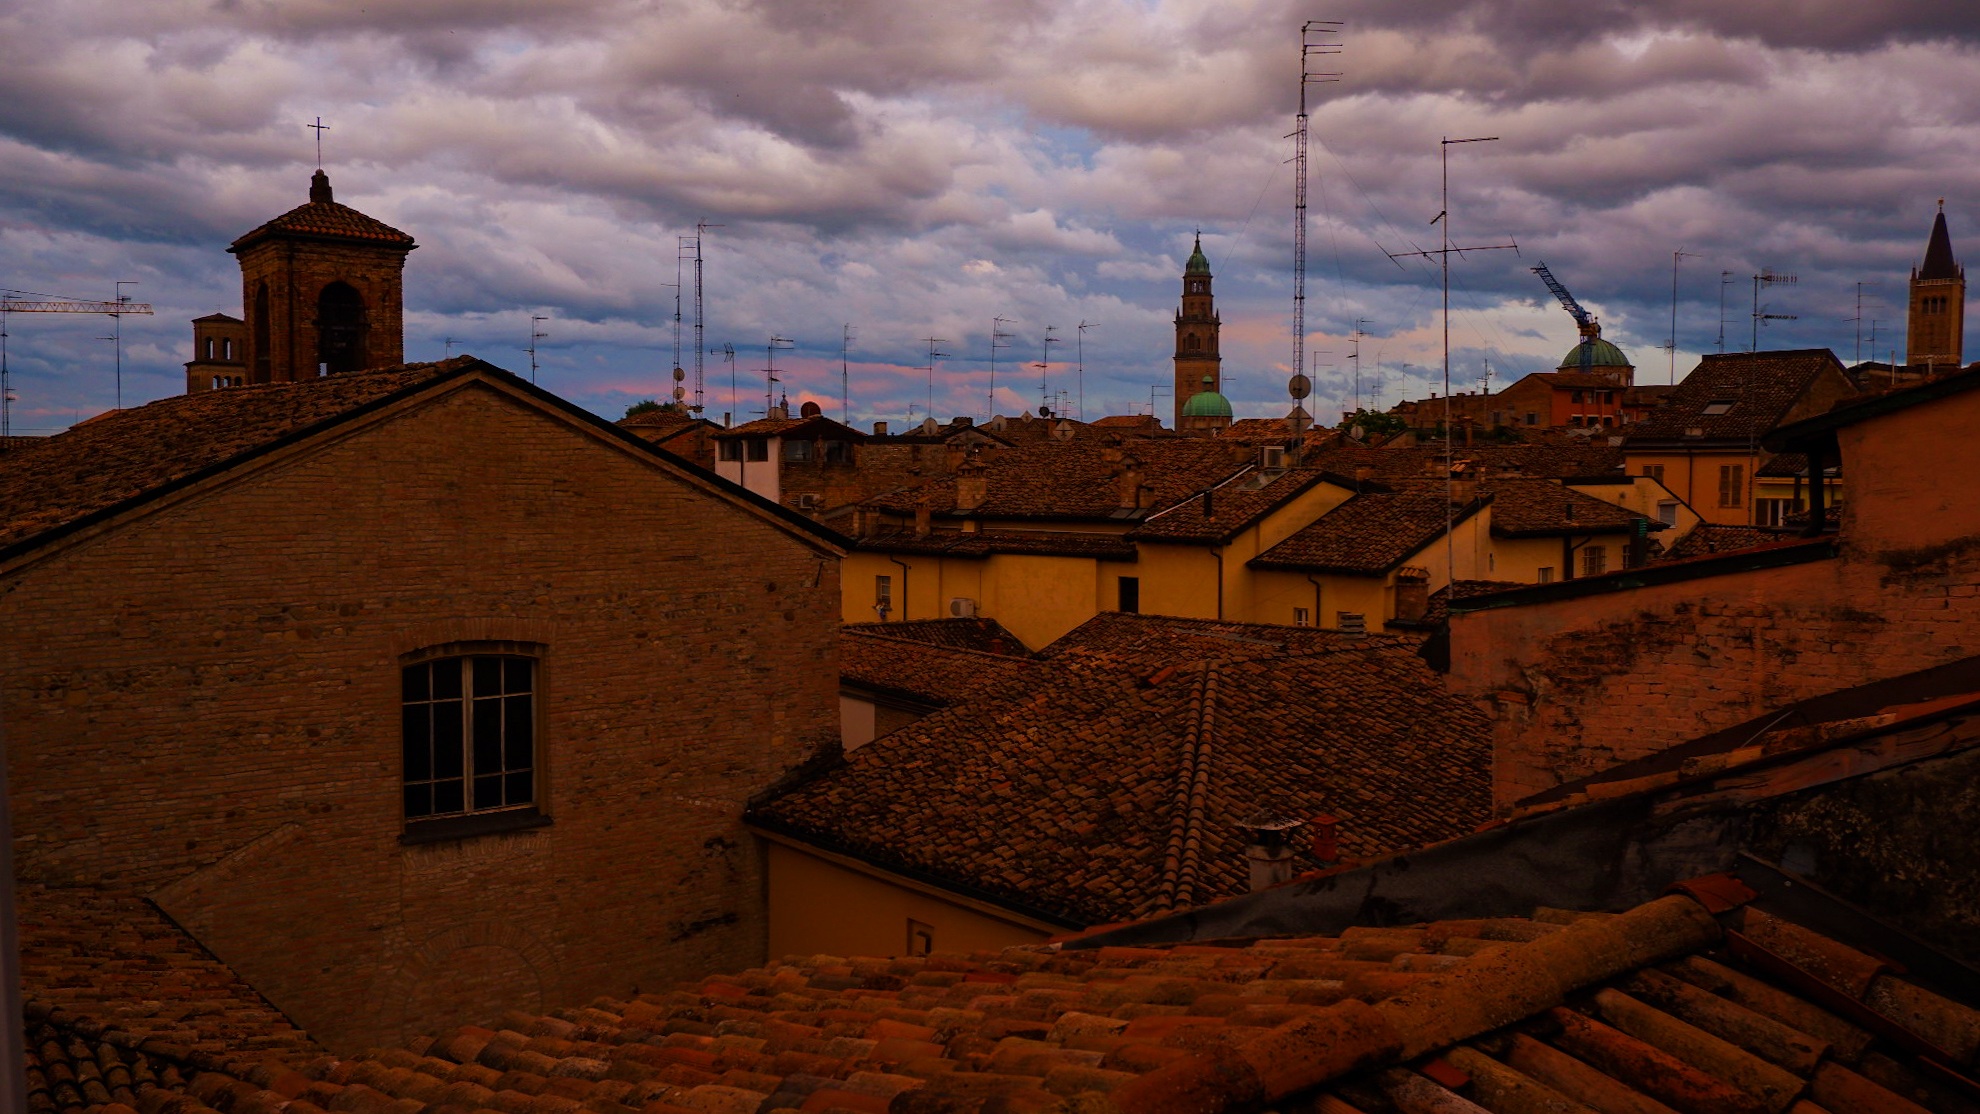 Roofs, antennas and sunsets - Parma...